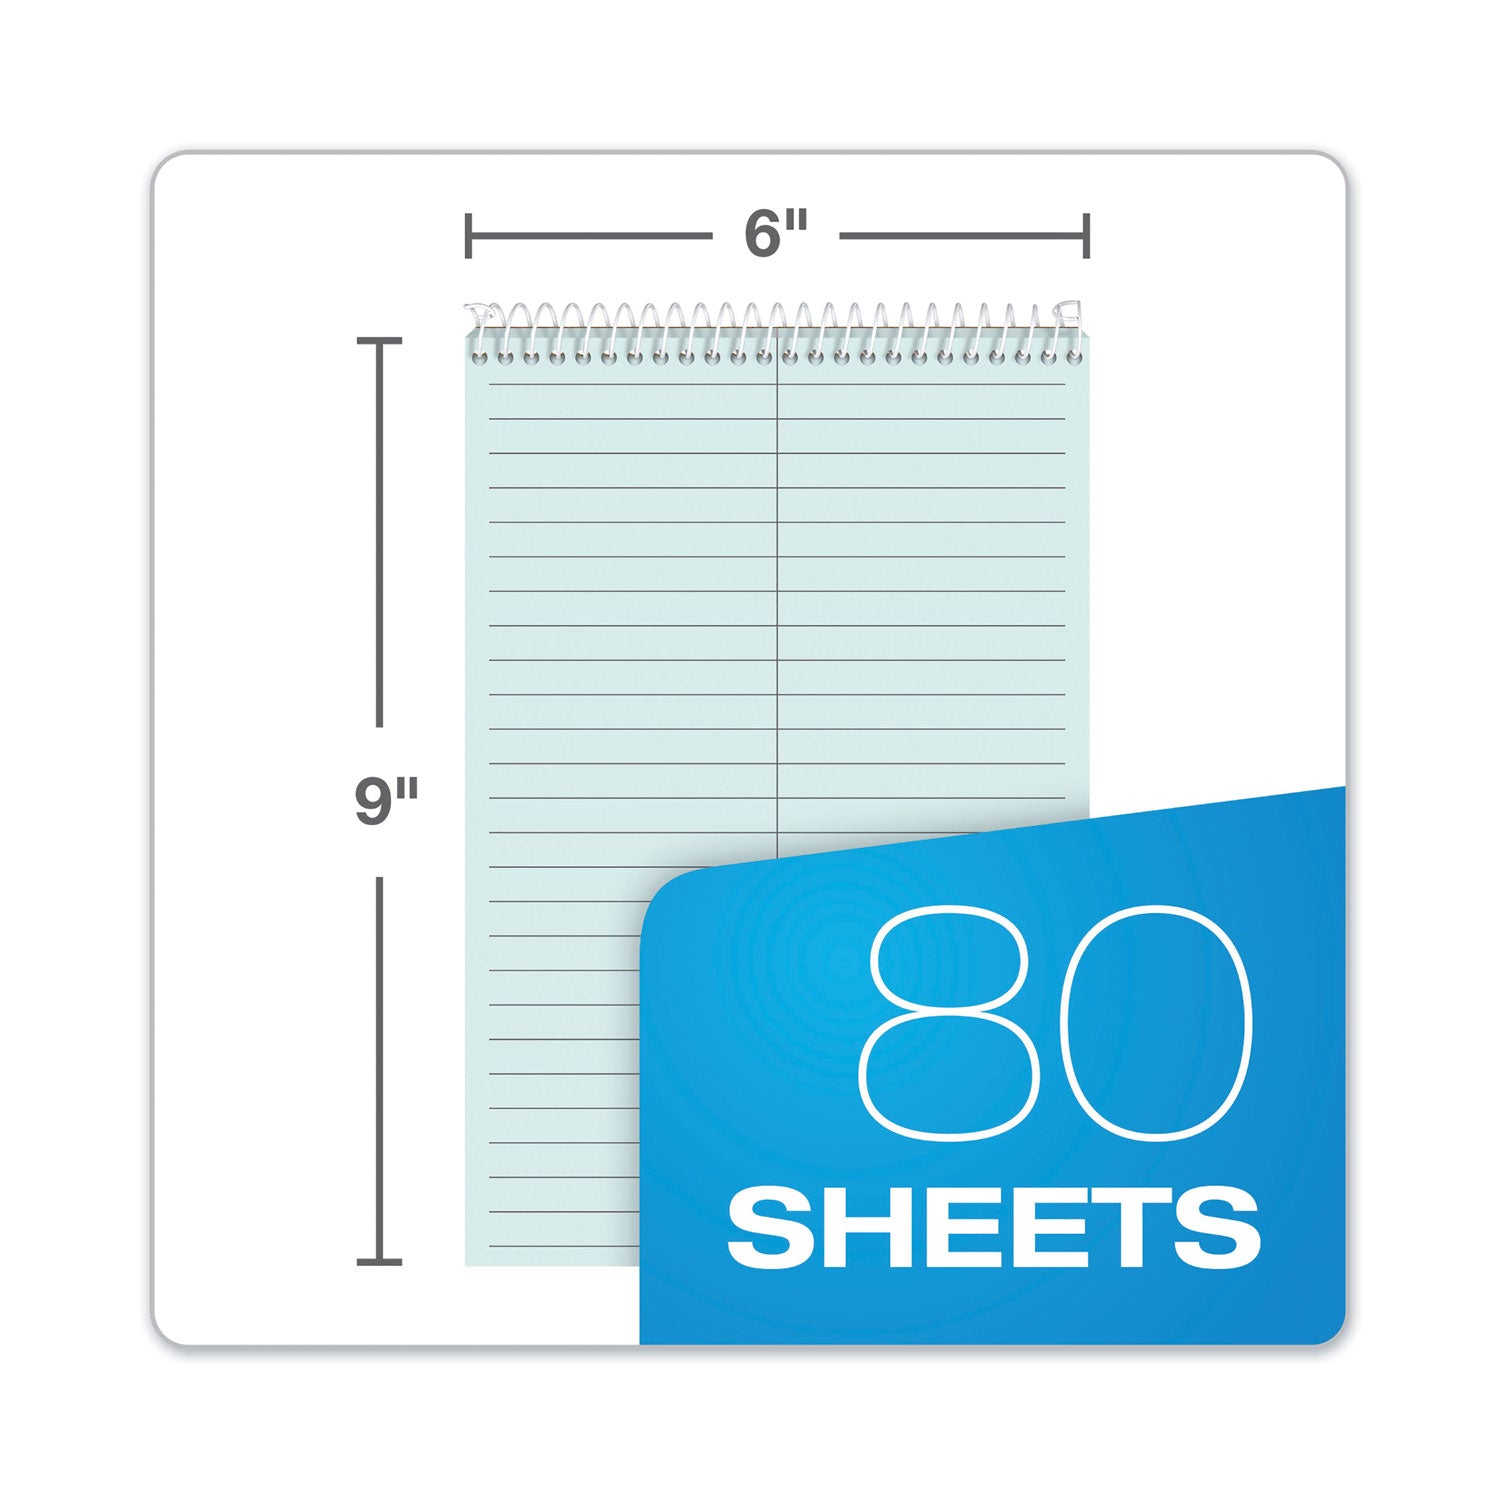 Prism Steno Pads, Gregg Rule, Blue Cover, 80 Blue 6 x 9 Sheets, 4/Pack - 